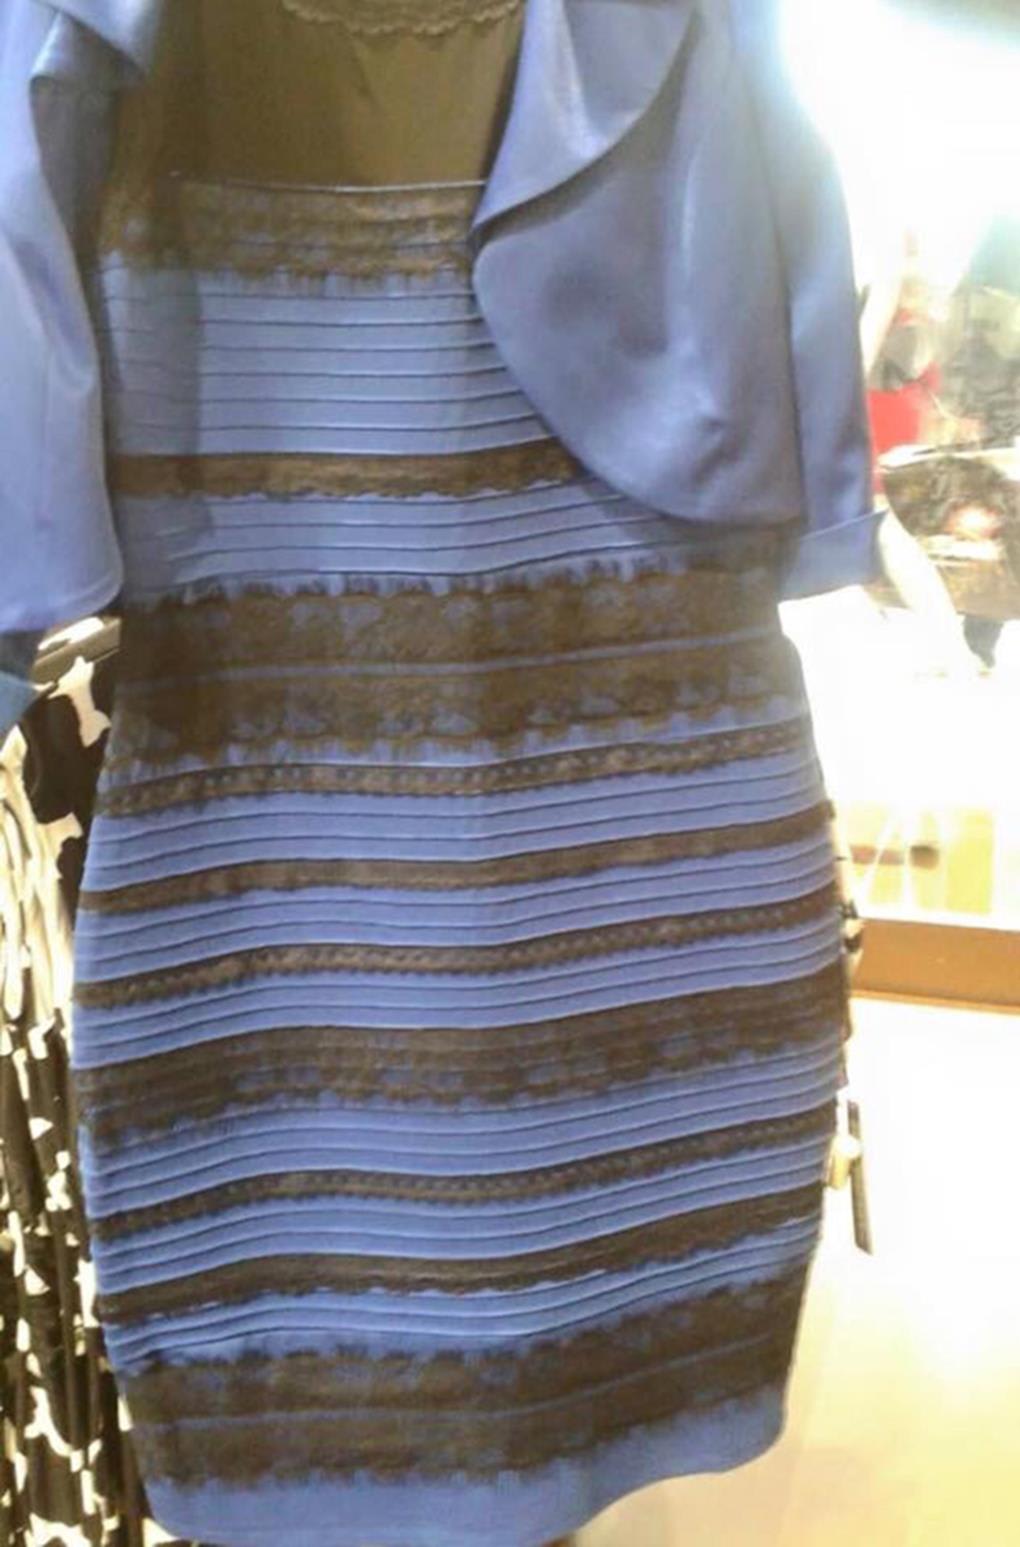 Image: A user posted this photo of a dress onto her Tumblr